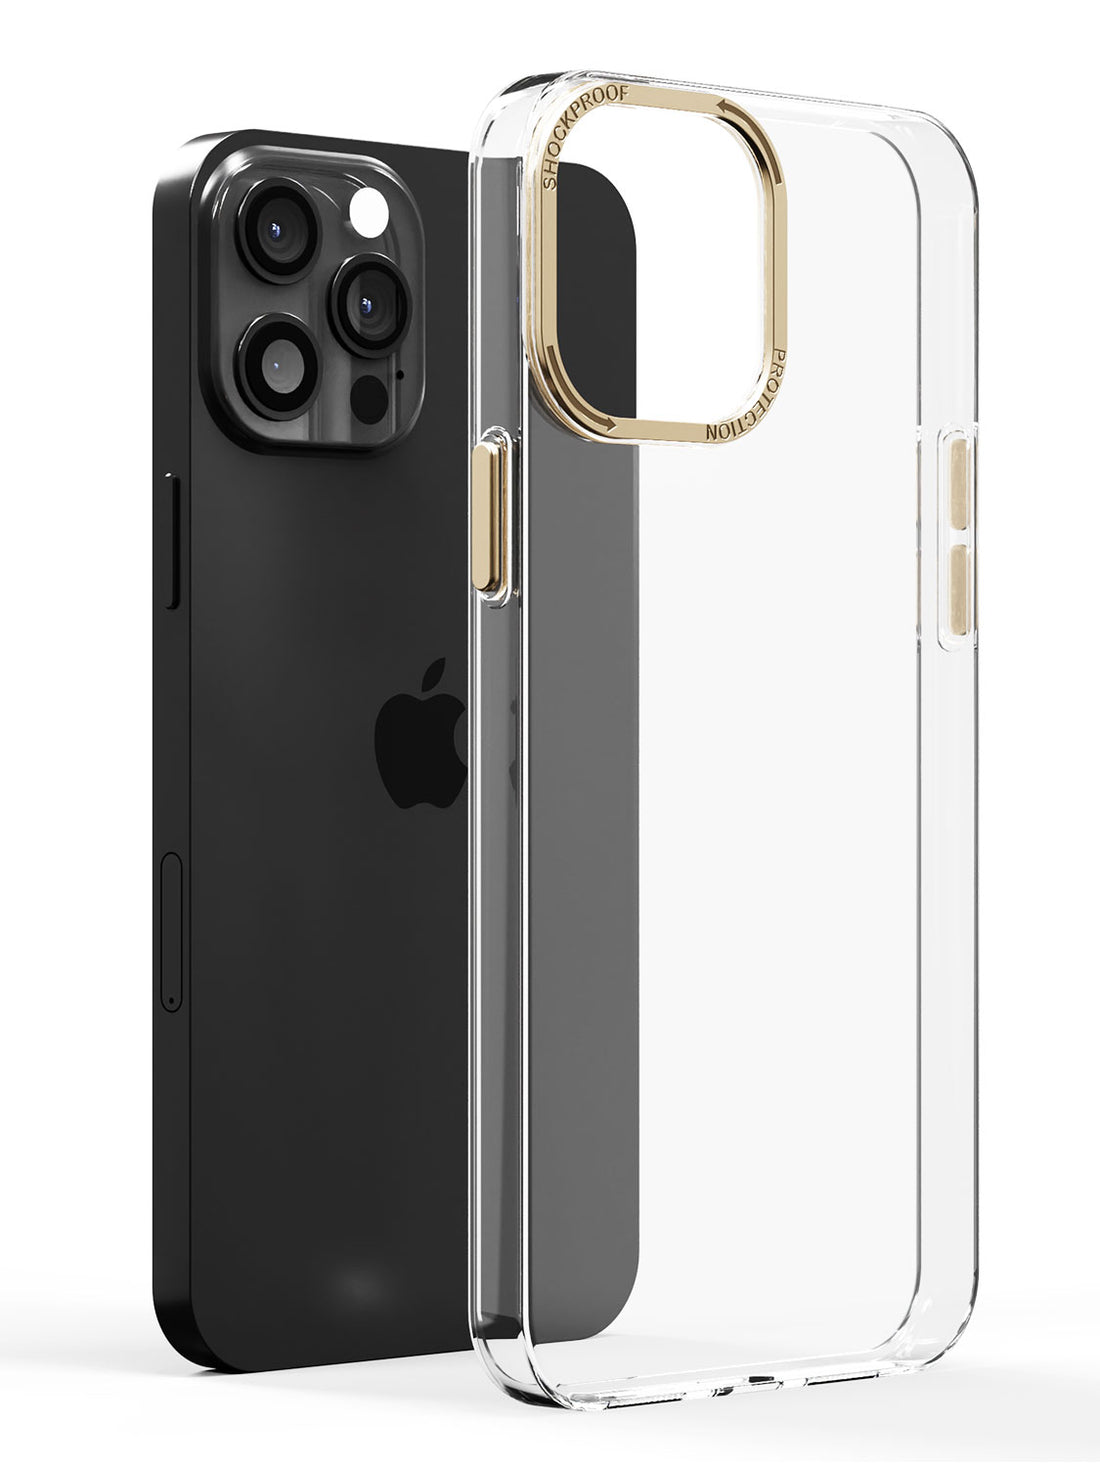 iphone 12 pro max case with camera protection , iphone 12 pro max cover with camera protection , iphone 12 pro max case cover with camera protection , iphone 12 pro max back cover with camera protection